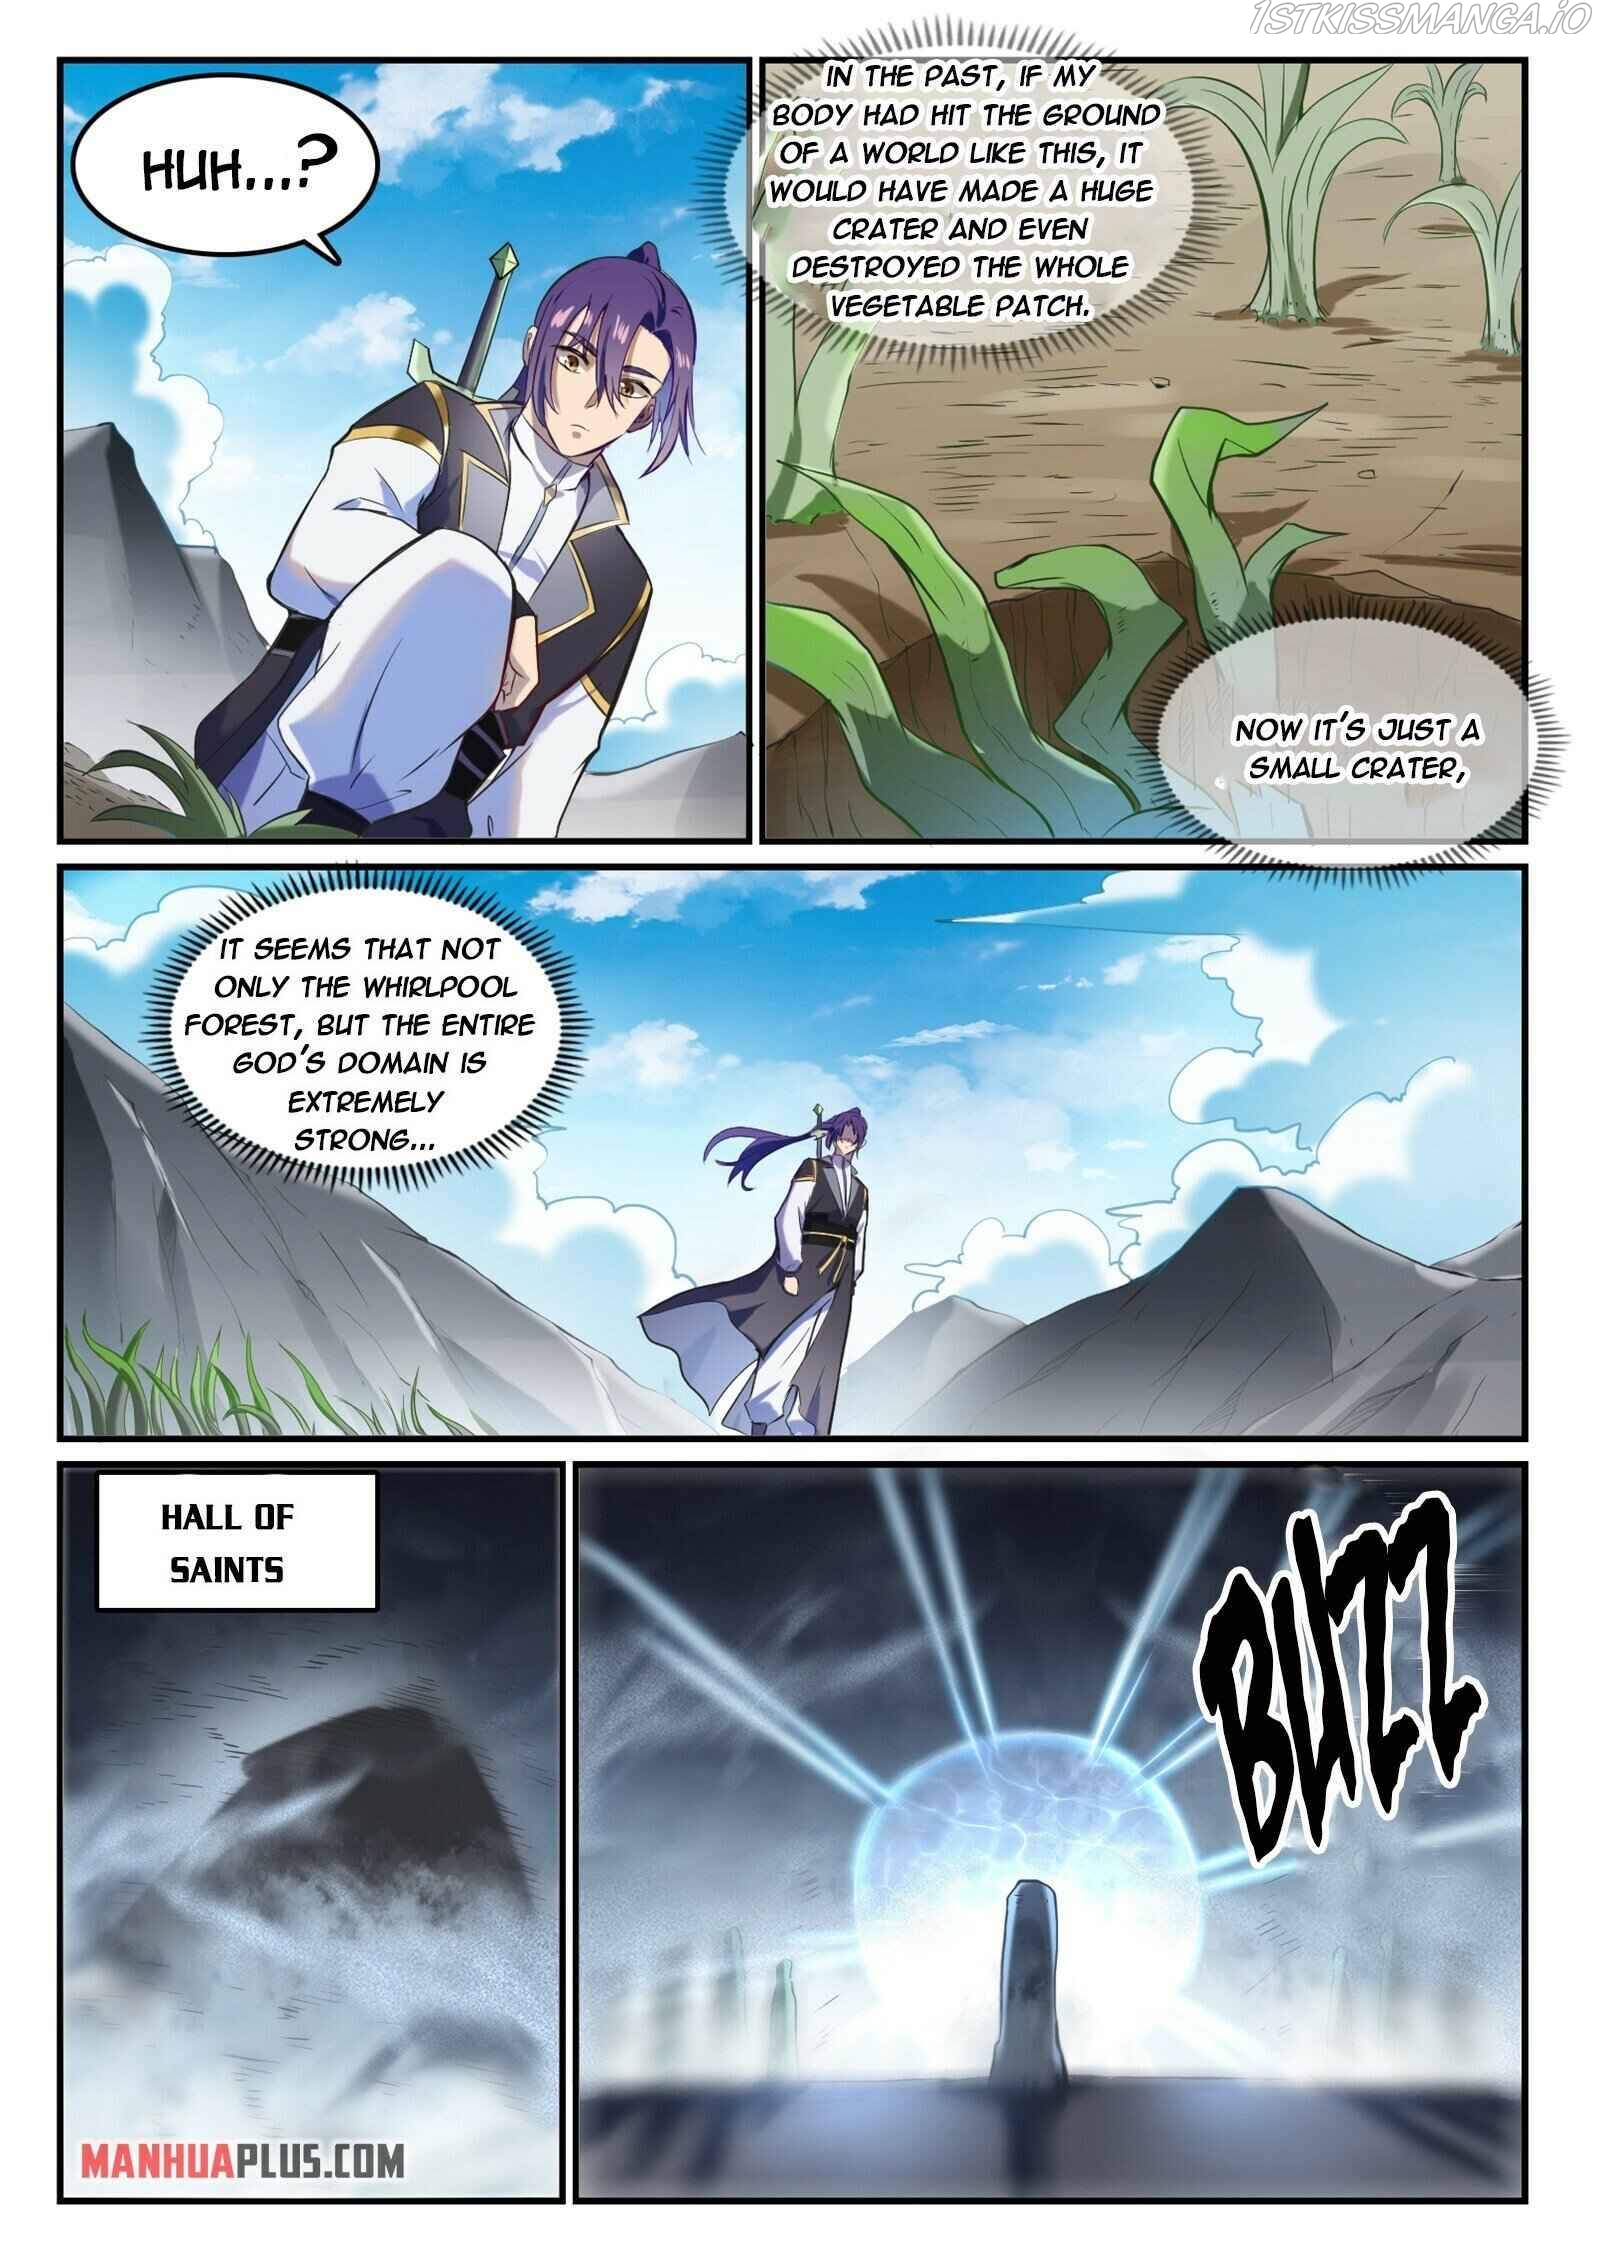 Apotheosis Chapter 842 - Page 1